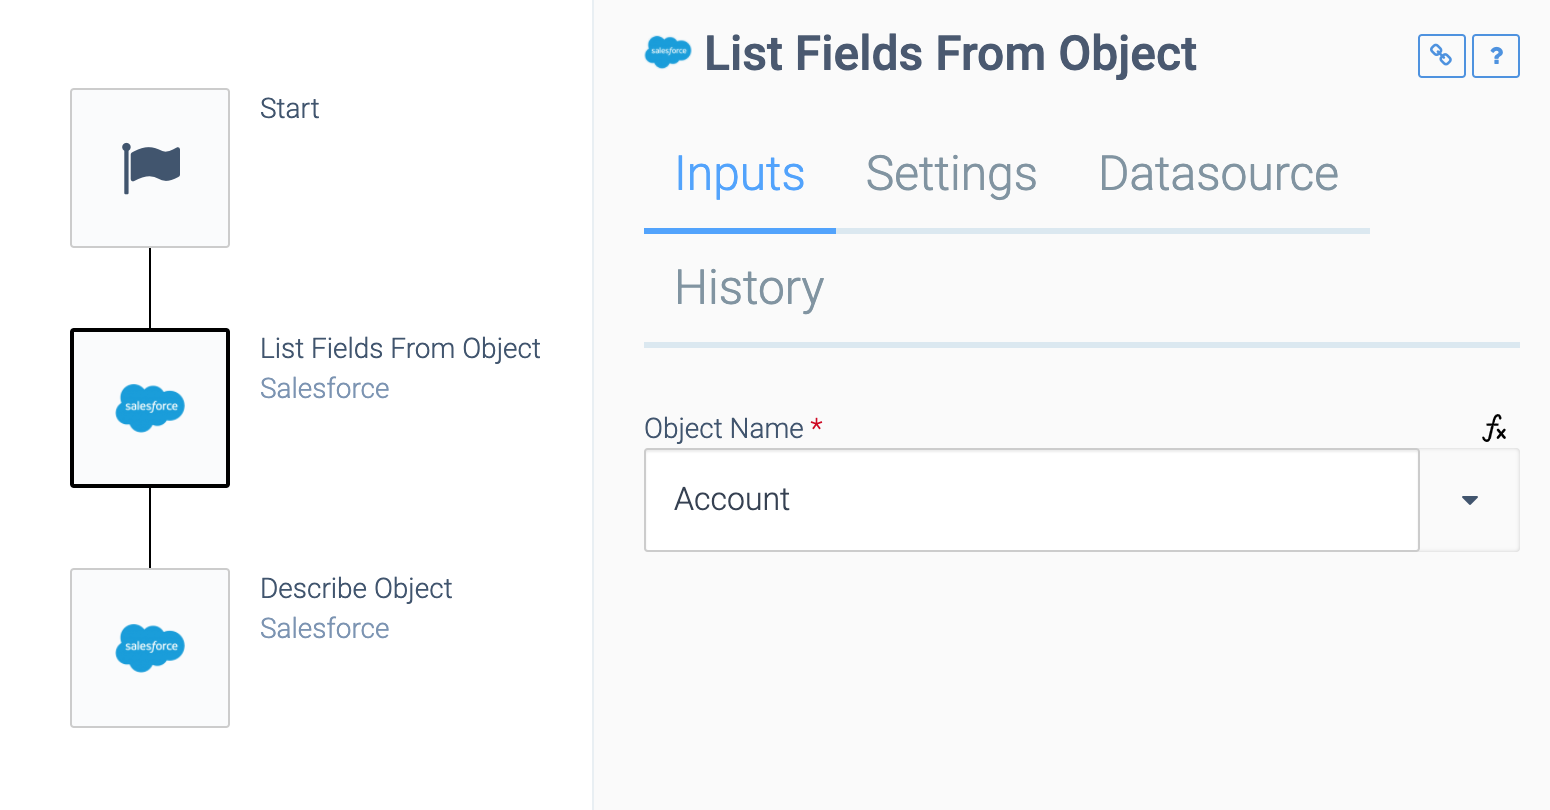 The List Fields From Object block and Describe Object block, both linked to Salesforce.